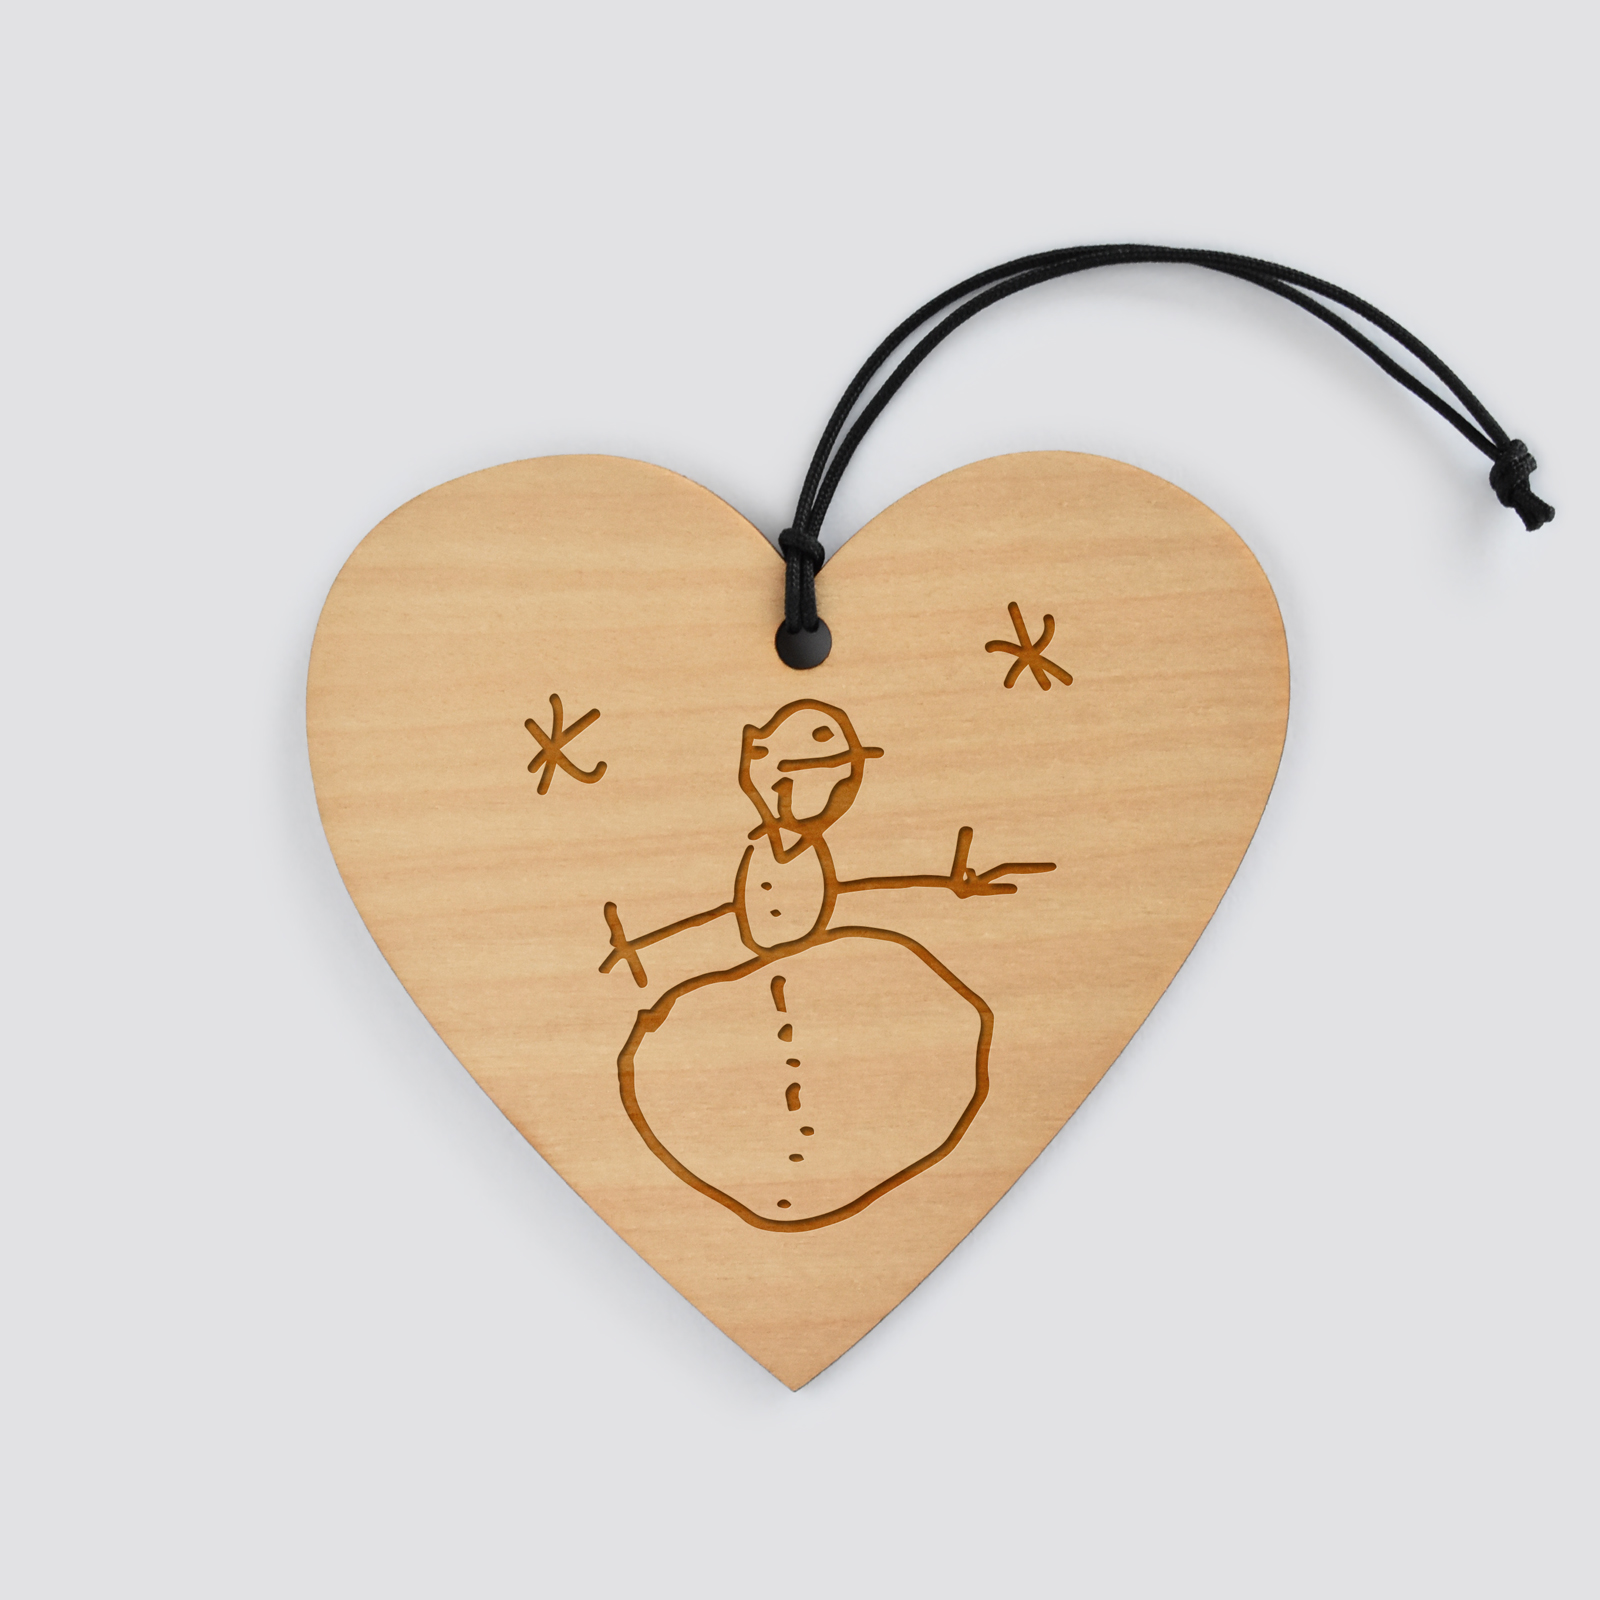 Personalised engraved wooden heart Christmas bauble - sketch